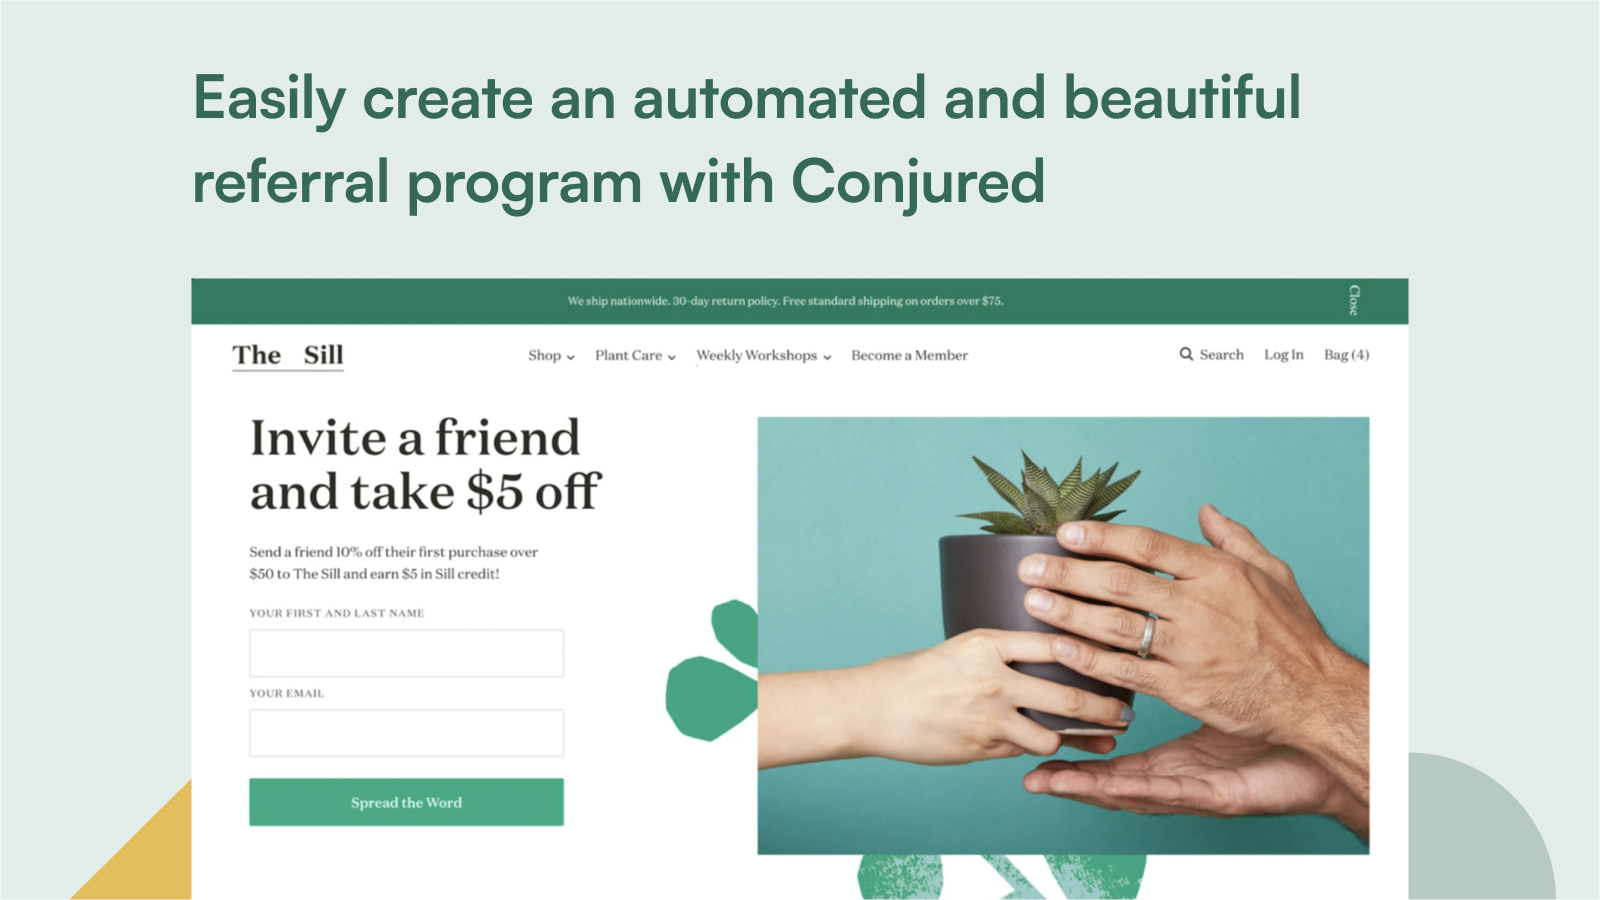 Easily create an automated and customizable referral program